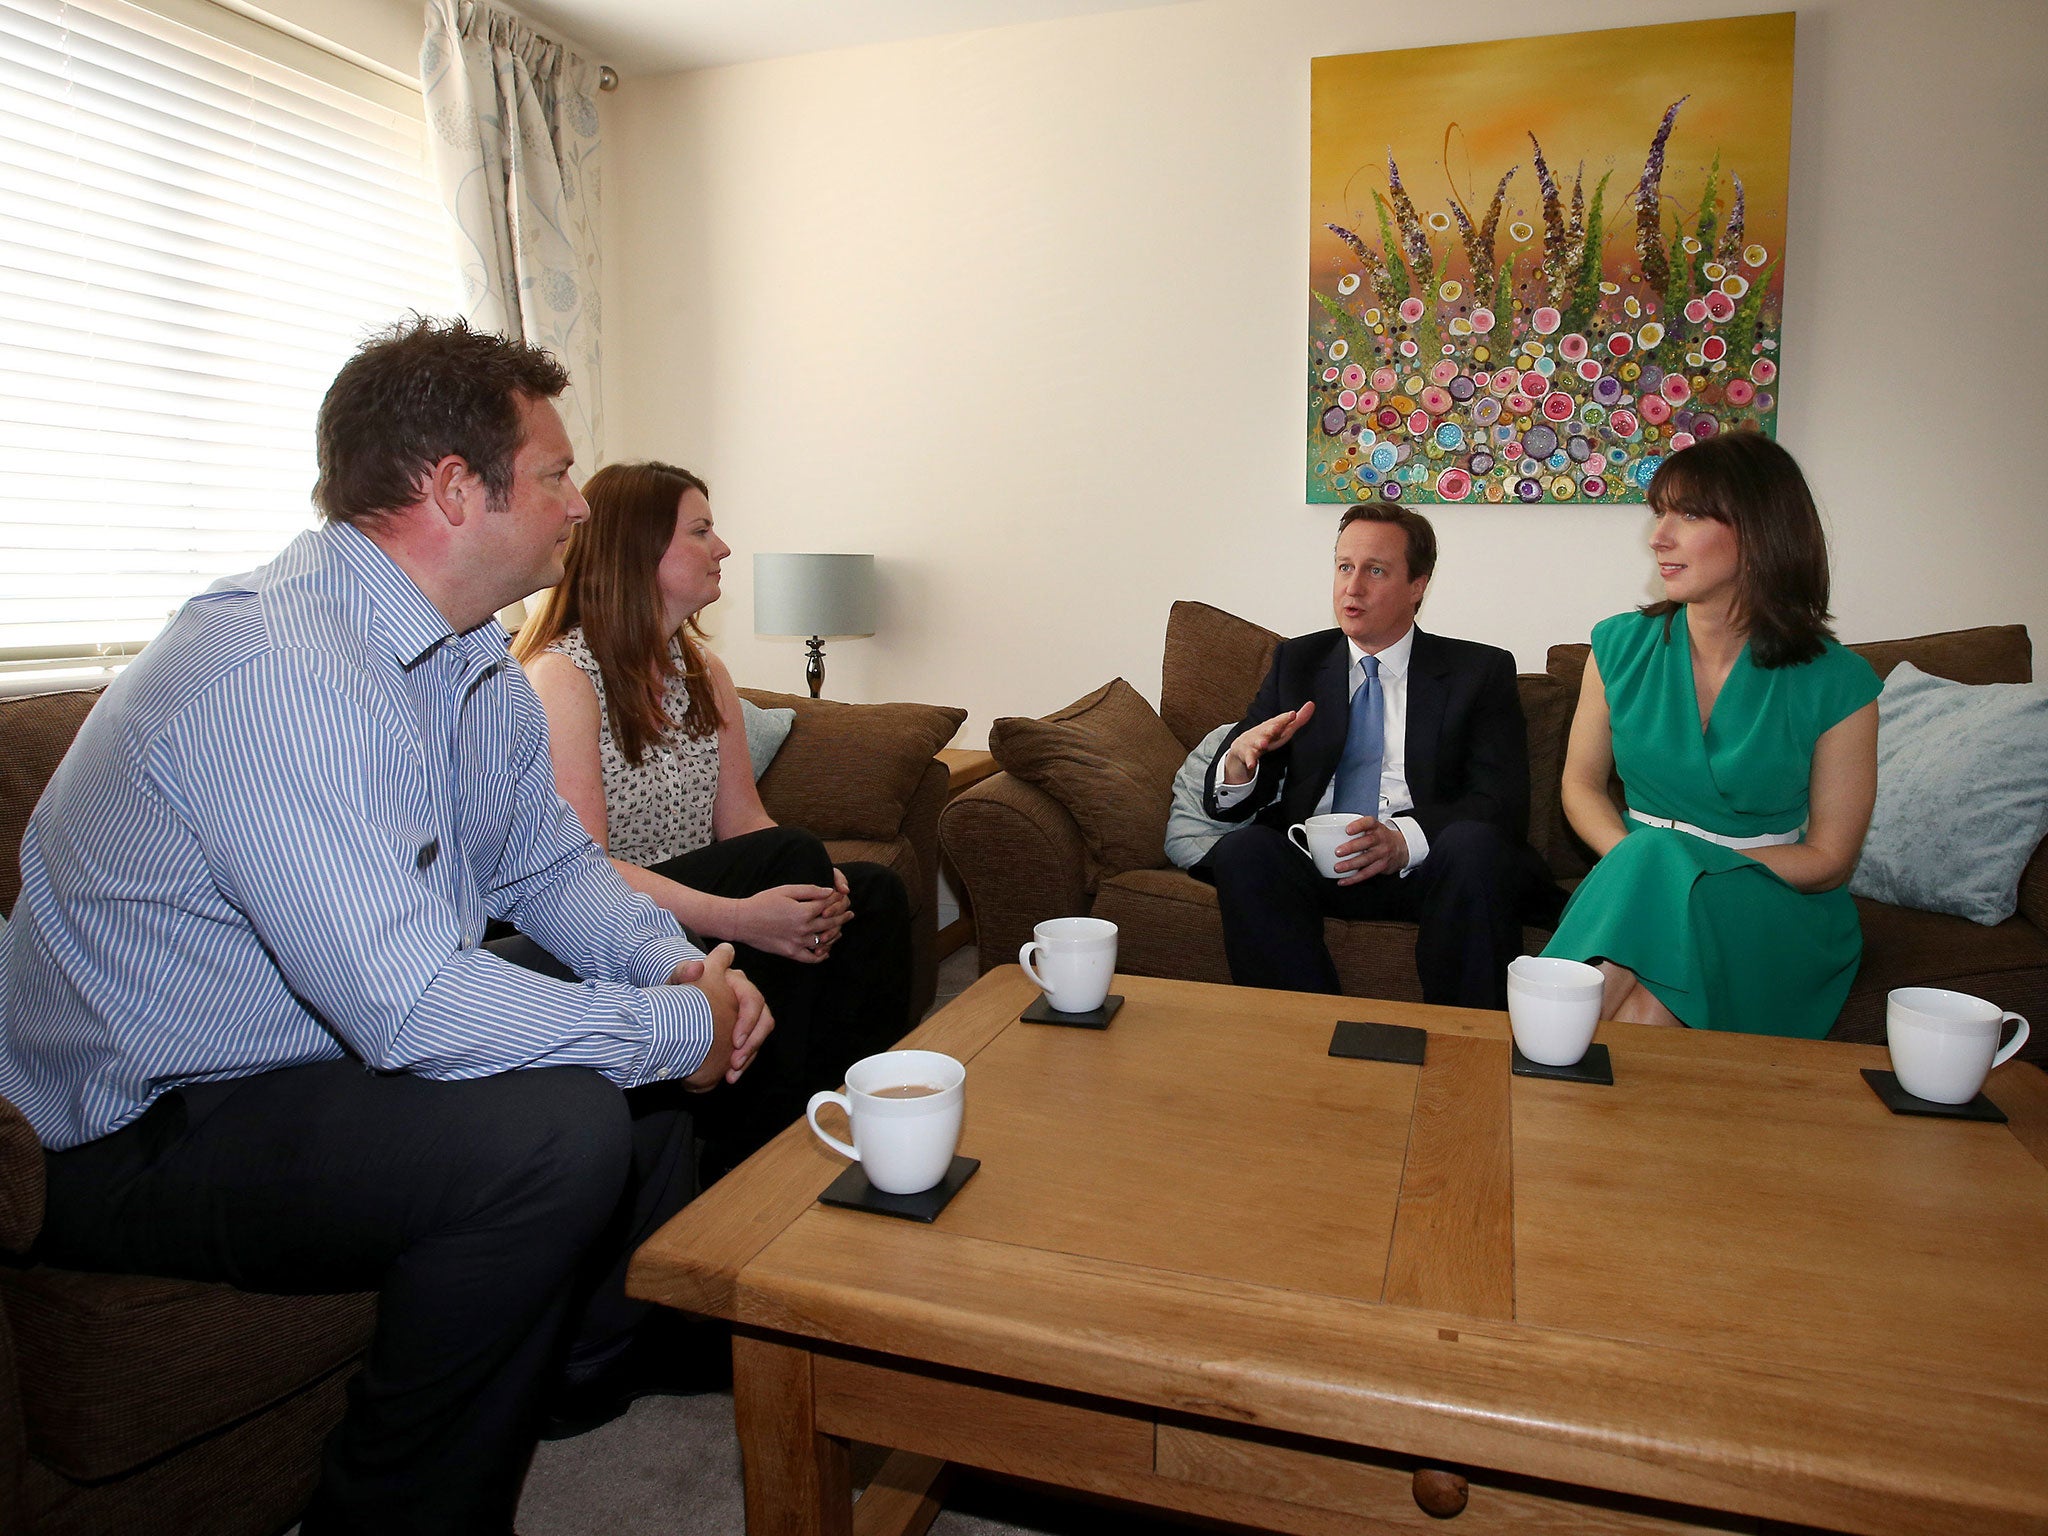 Prime Minister David Cameron and his wife Samantha meet Nicole Calver and Paul Pearson in their home in Swindon. The Conservatives have launched their election manifesto with a promise to extend the right to buy housing scheme for housing association tena